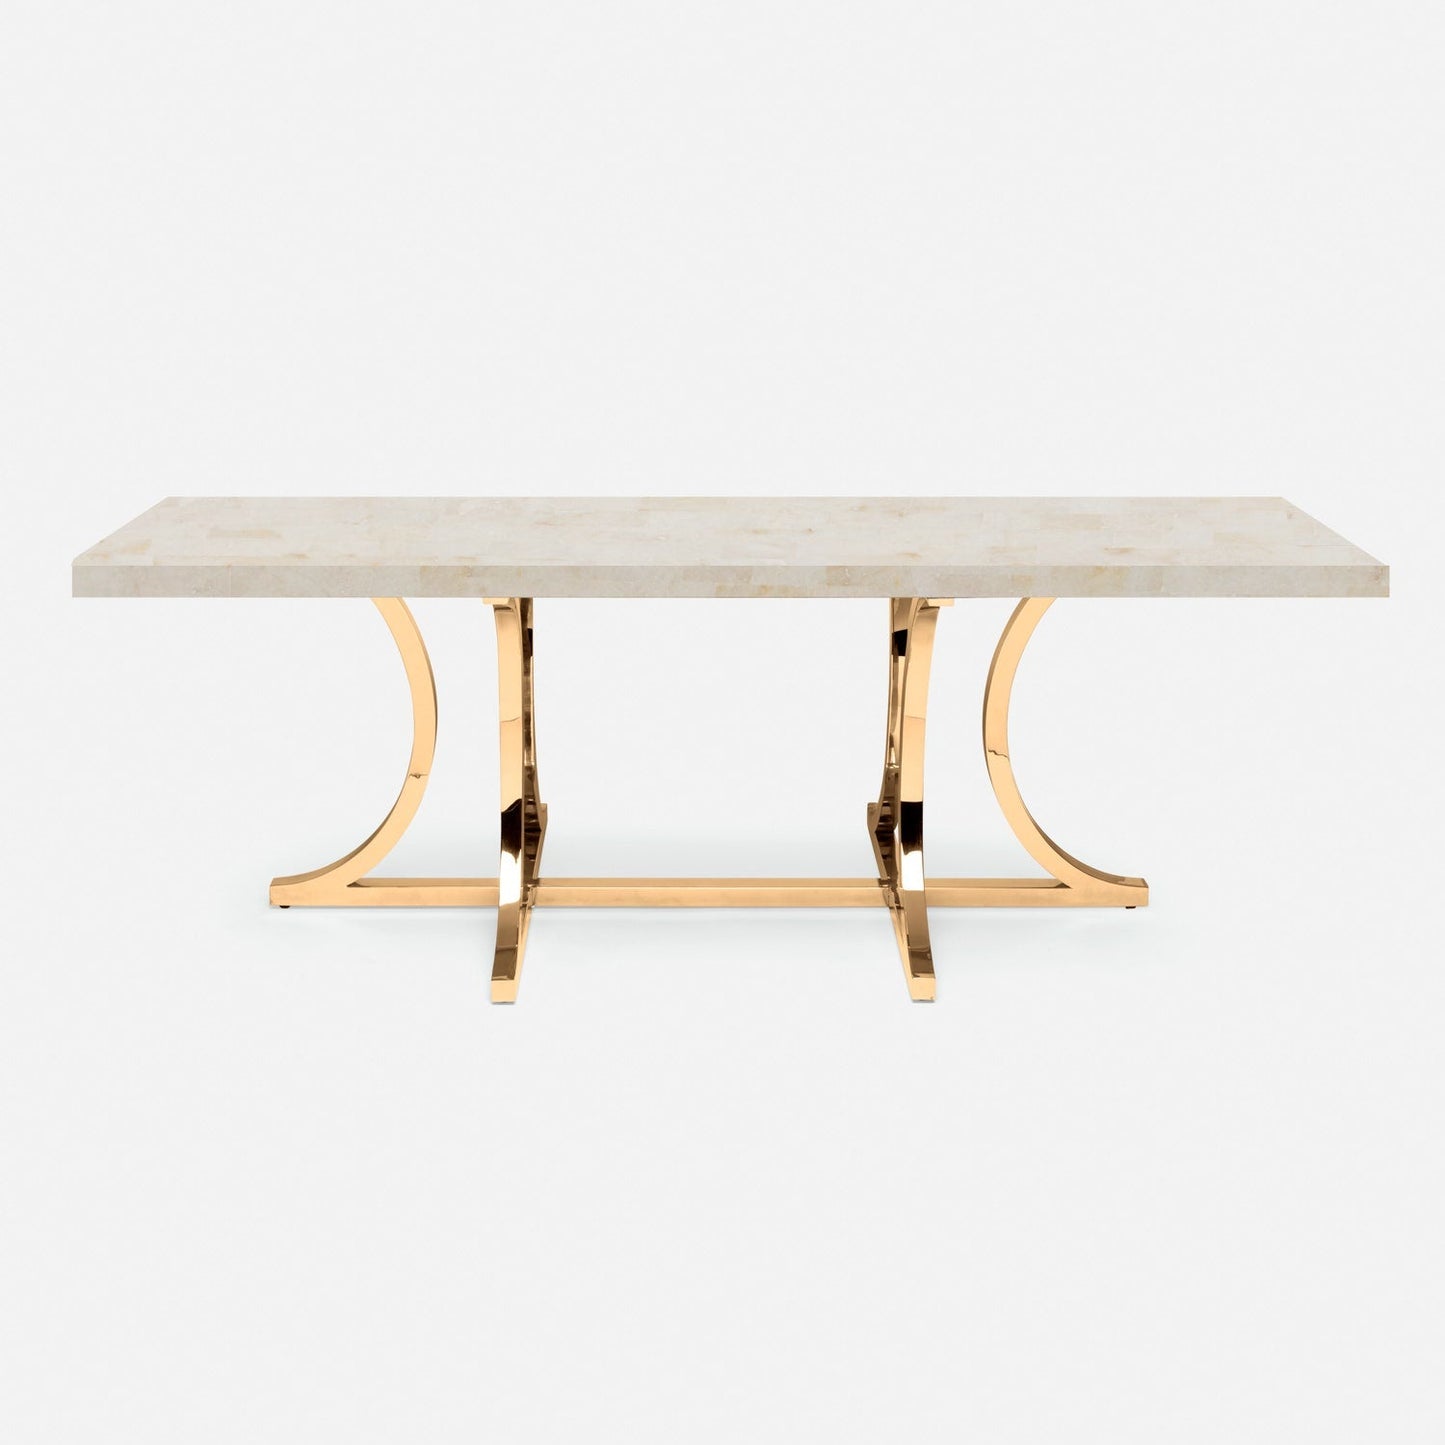 Made Goods Leighton 110" x 40" x 30" Polished Brass Steel Dinning Table With Rectangle Ice Crystal Stone Table Top